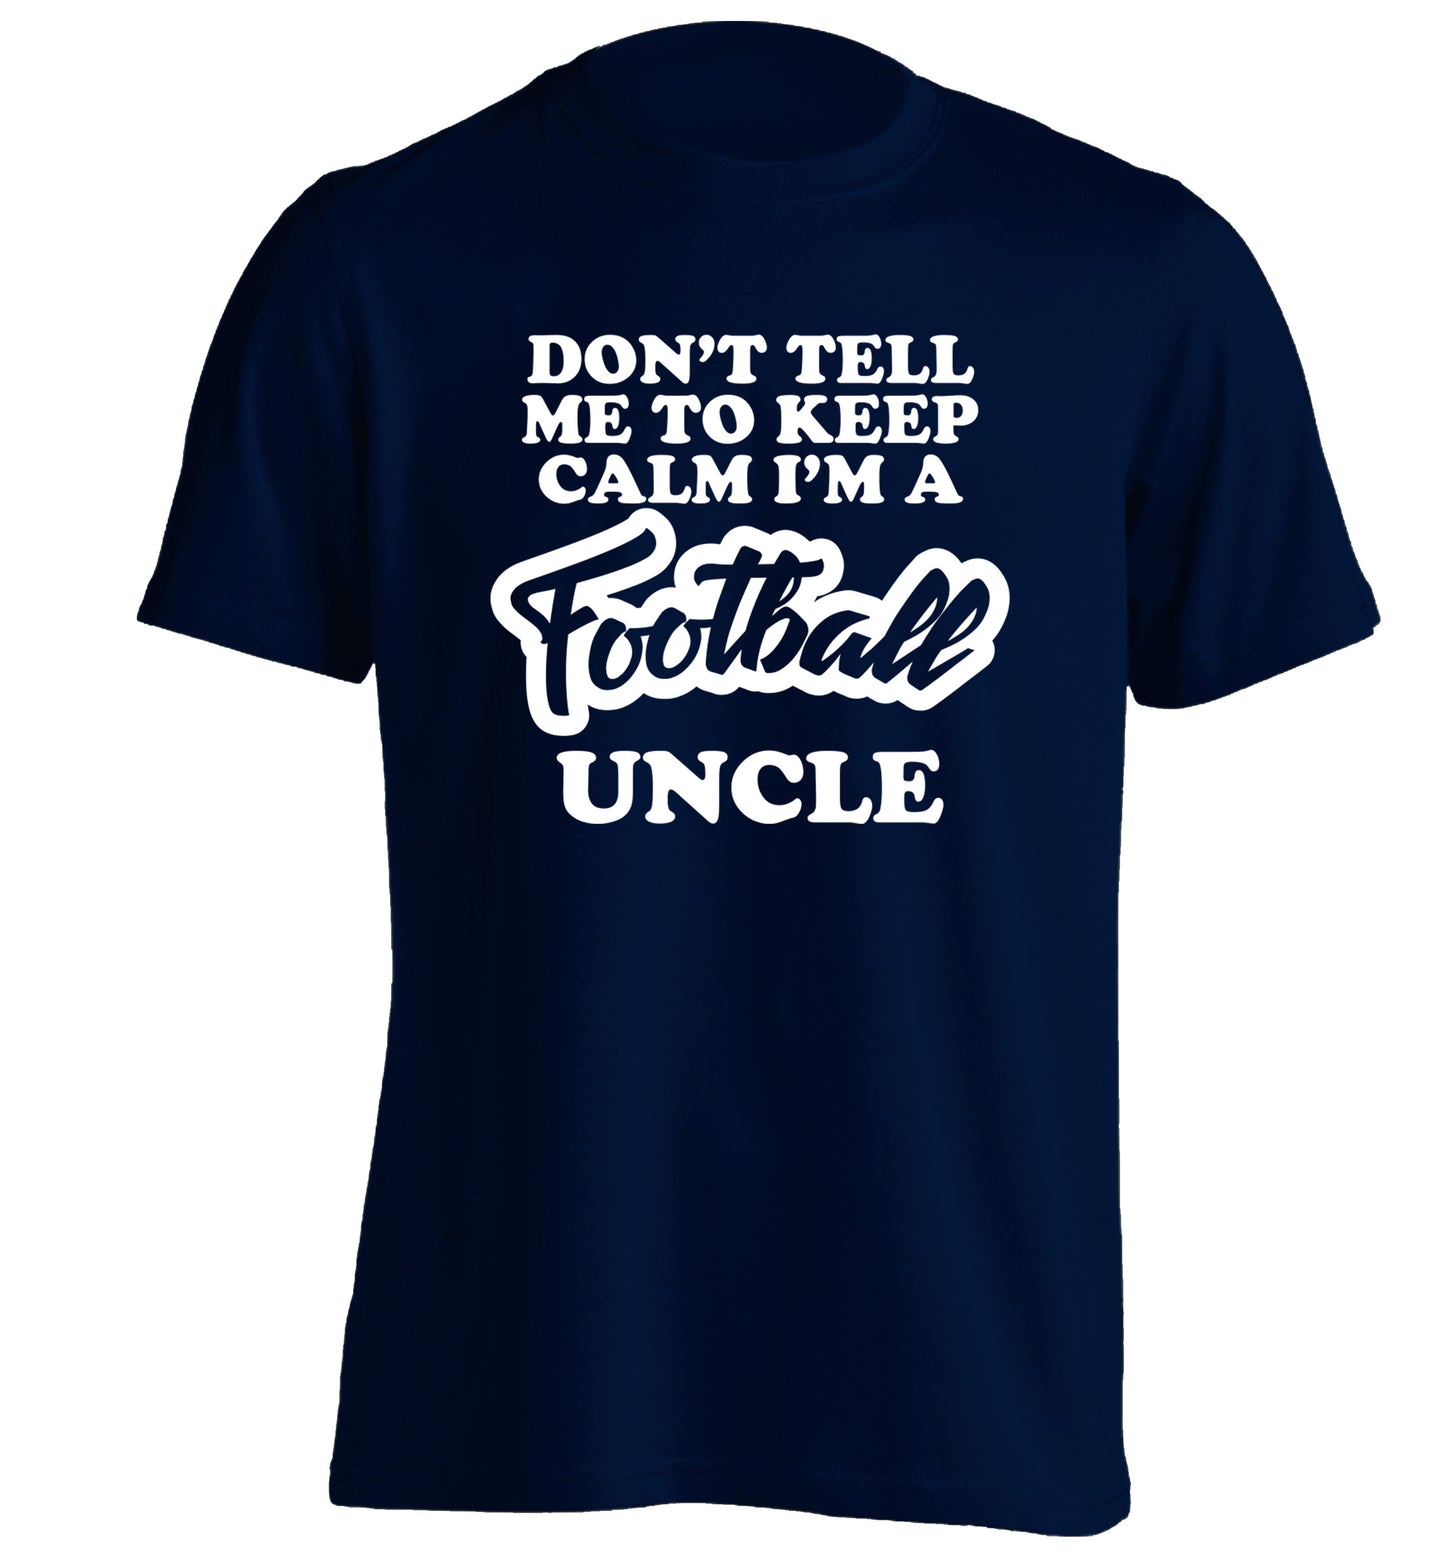 Worlds most amazing football uncle adults unisexnavy Tshirt 2XL